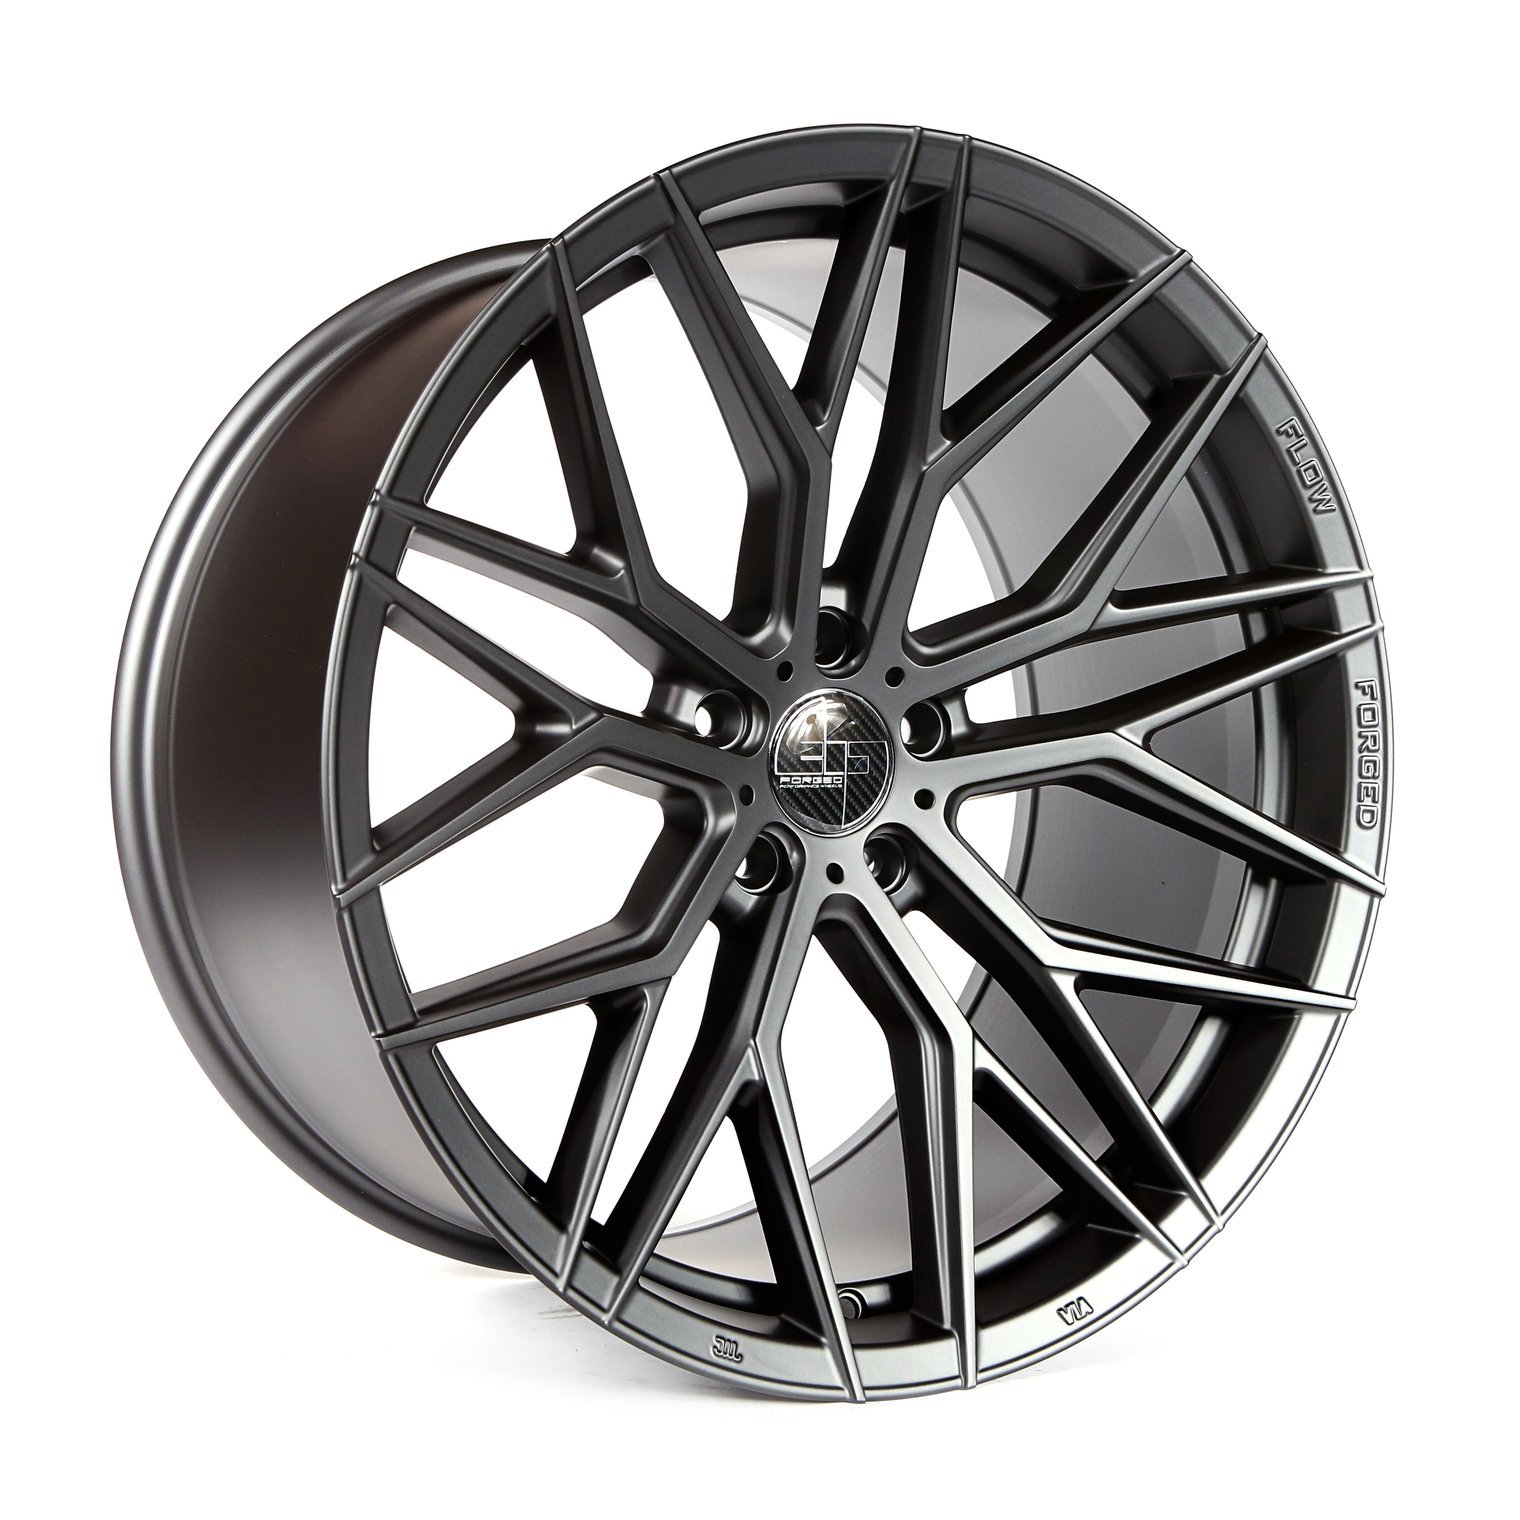 305 Forged FT107 forged wheels